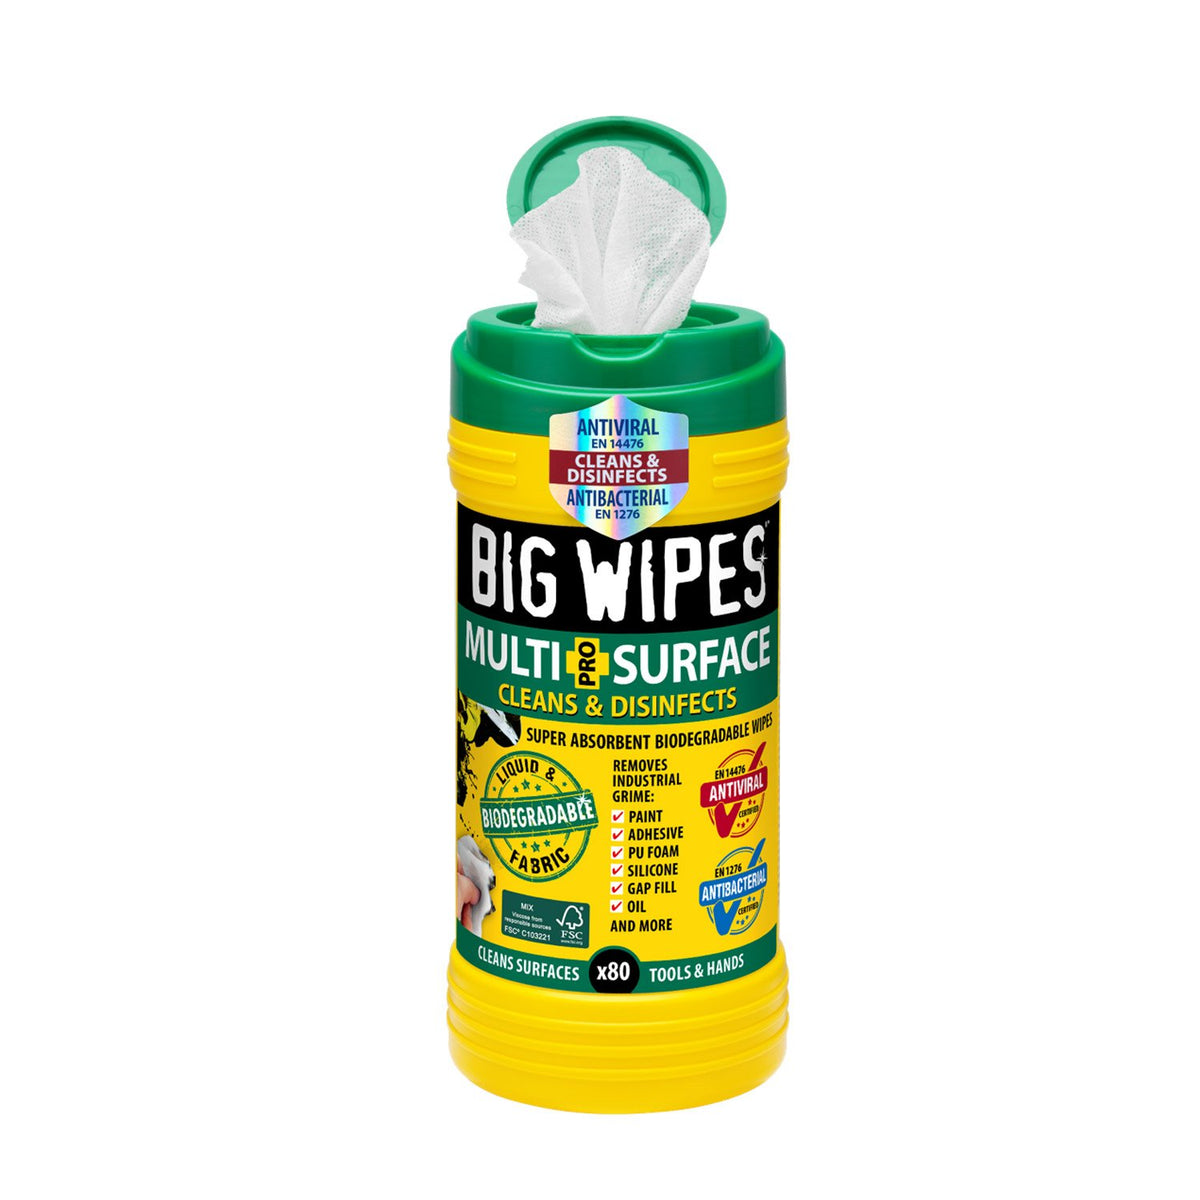 Big Wipes 80's PRO+ MULTI SURFACE - BIODEGRDABLE FSC FABRIC - ANTIVIRAL - GREEN TOP - WIPE TUBS